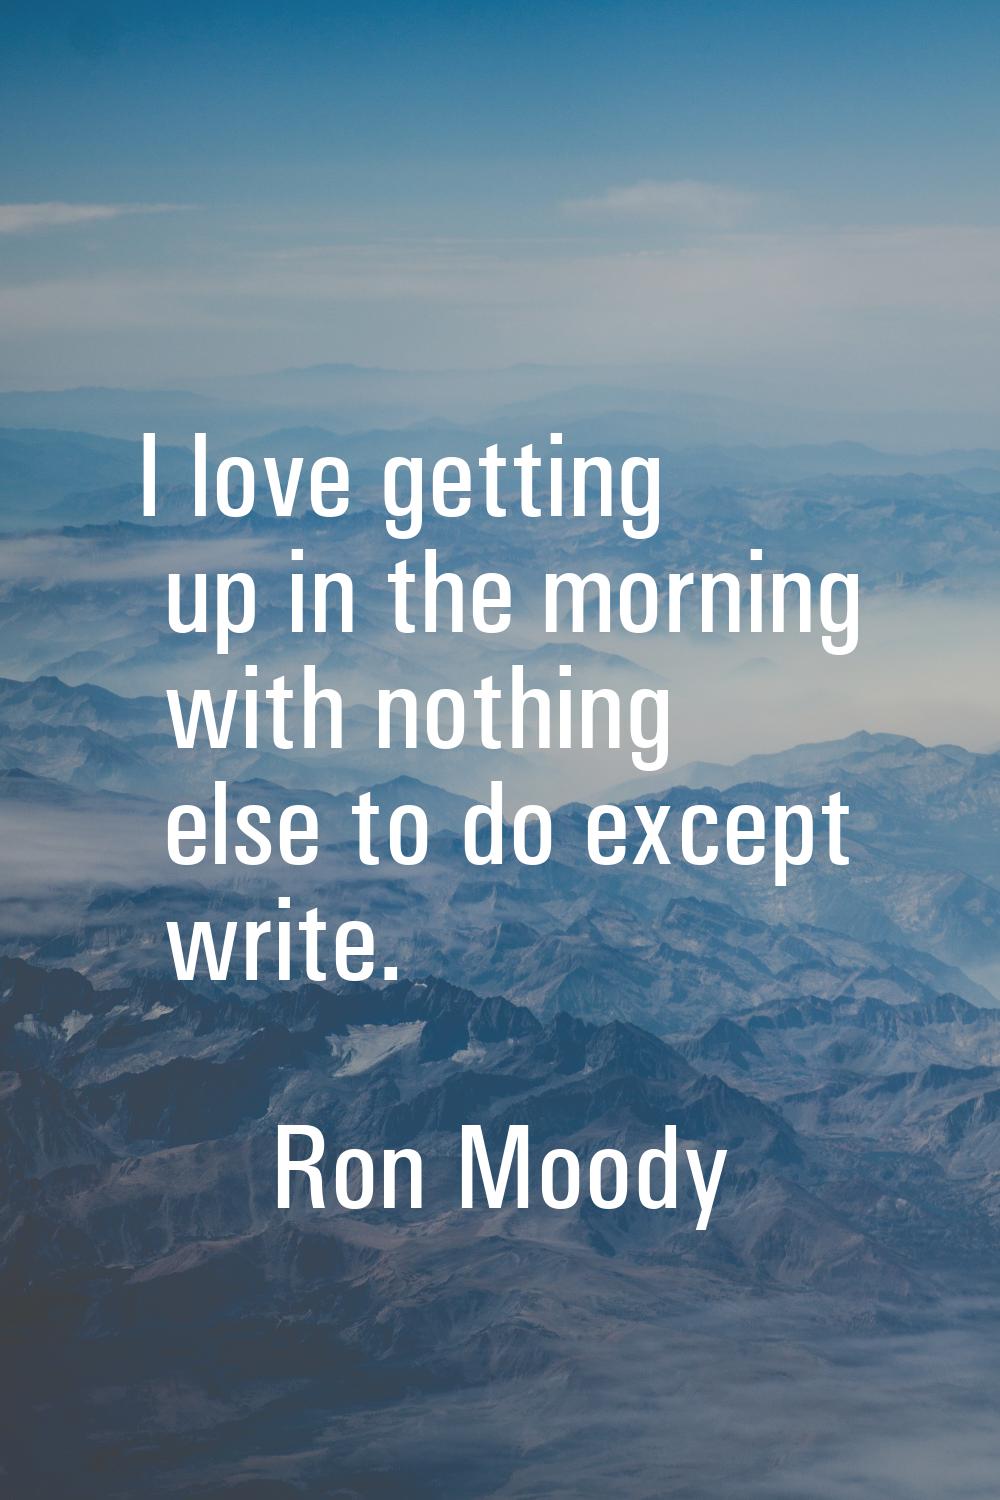 I love getting up in the morning with nothing else to do except write.